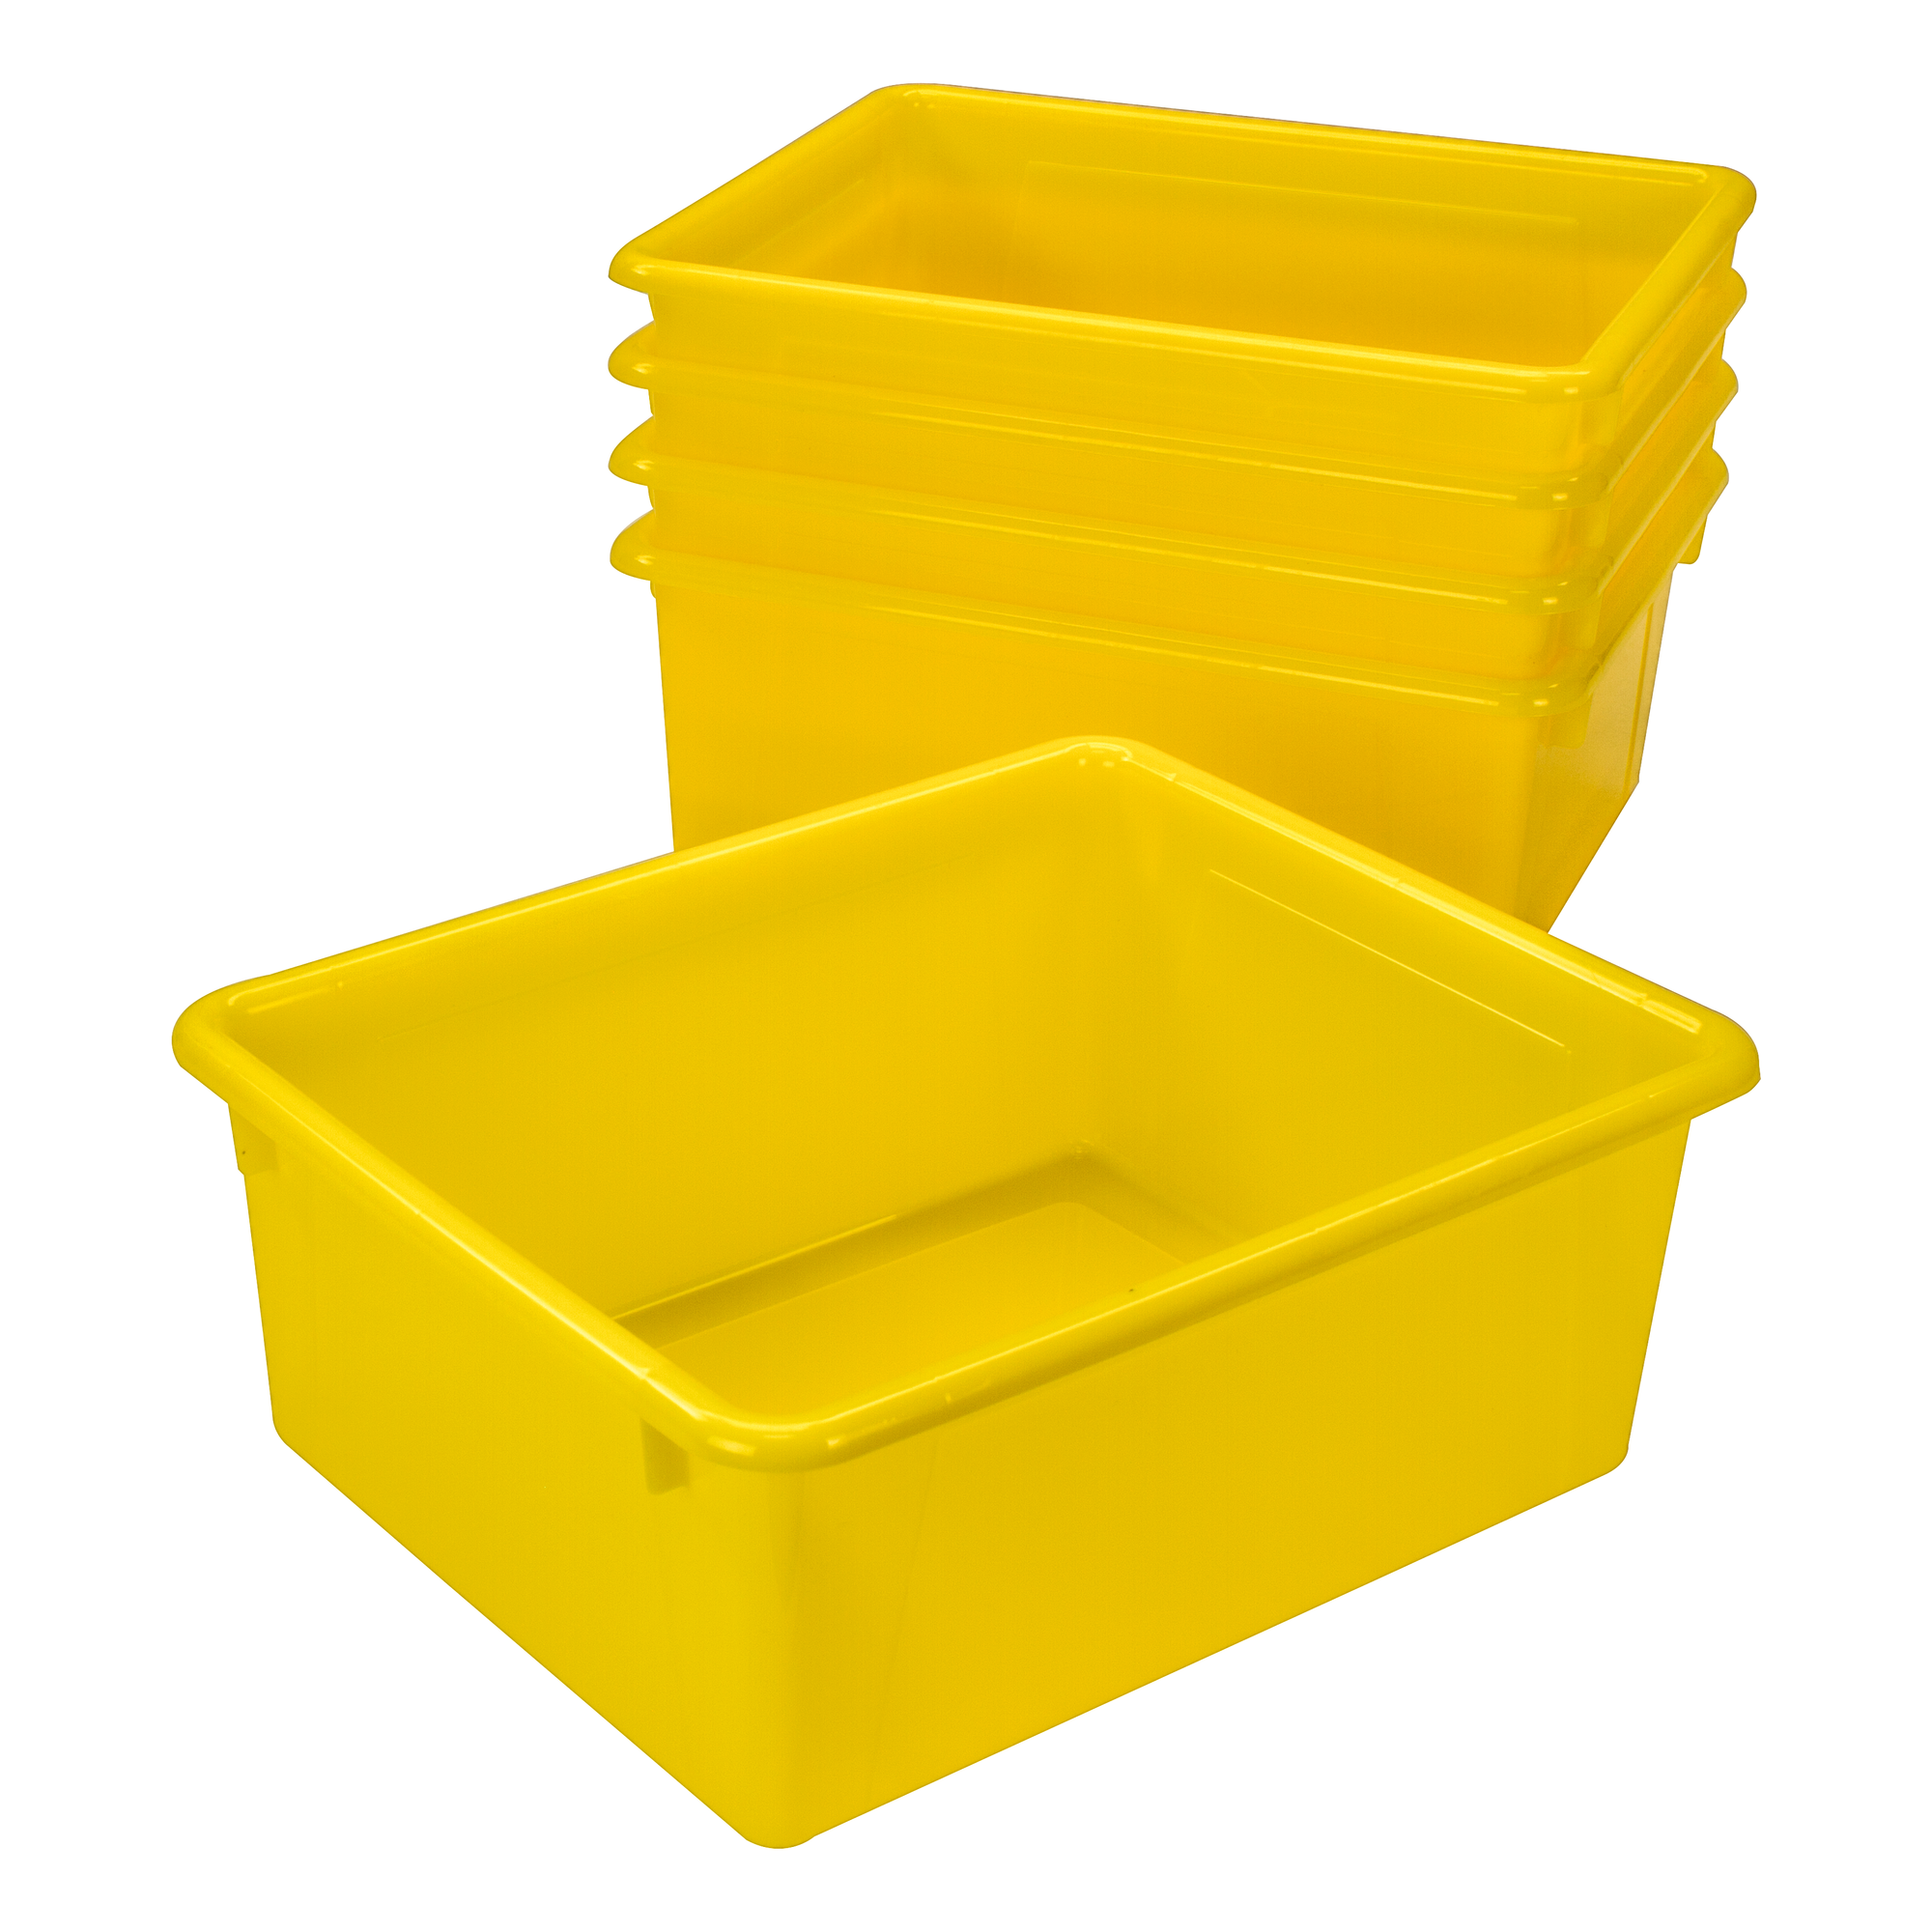 Storex Storage Tray, Letter Size, 10 x 13 x 5 Inches, Yellow, 5-Pack